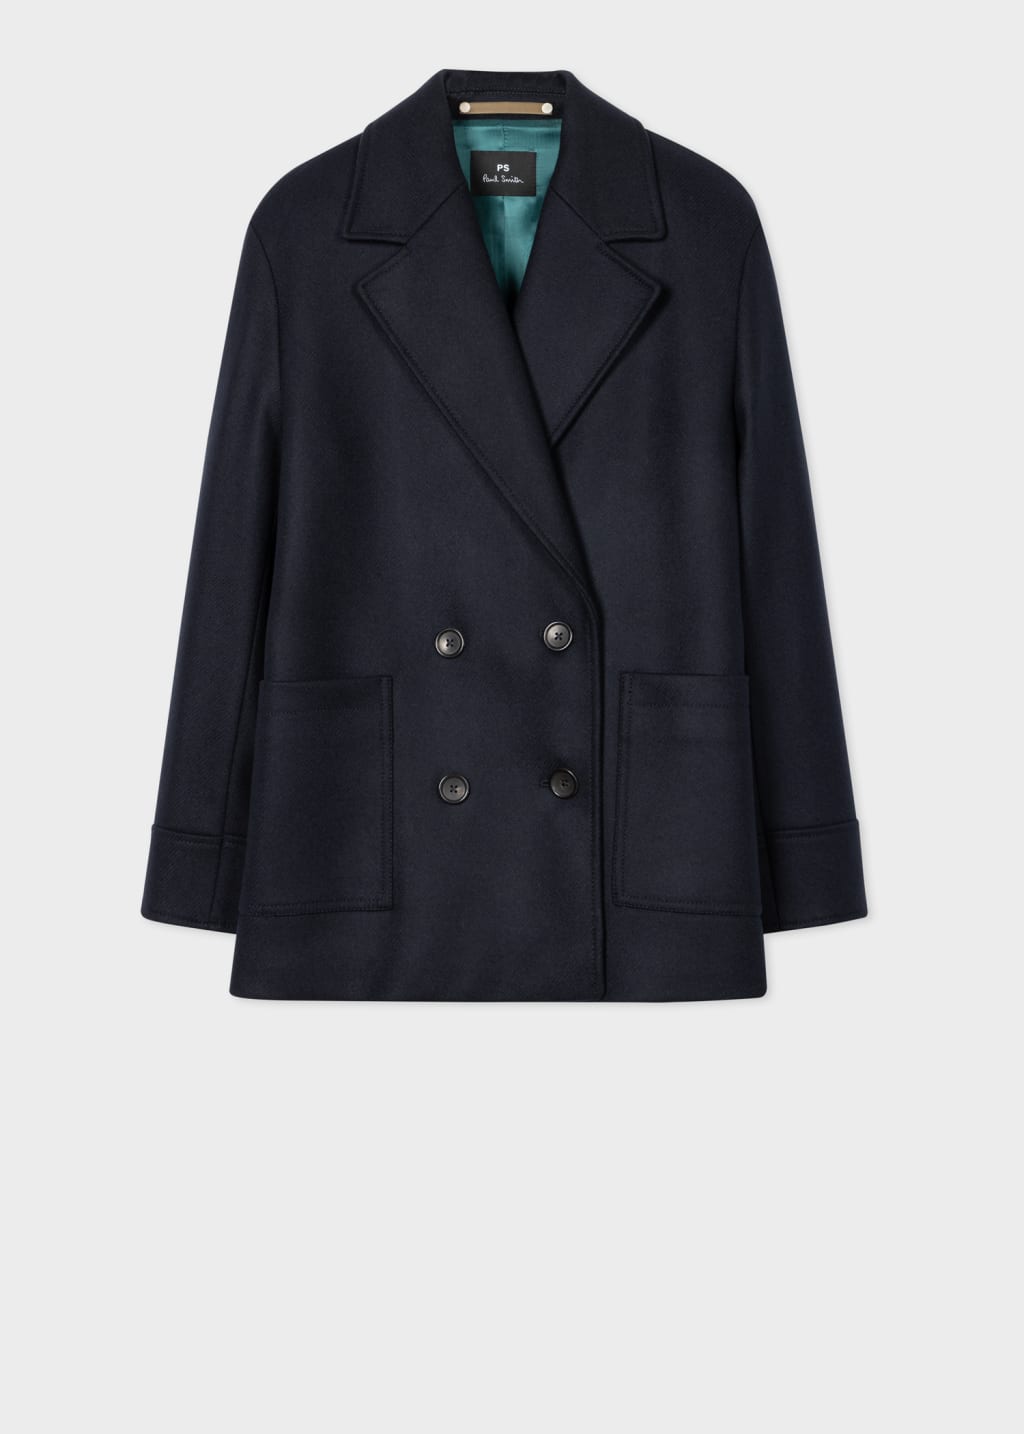 Model View - Women's Navy Wool-Cashmere Blend Pea Coat by Paul Smith